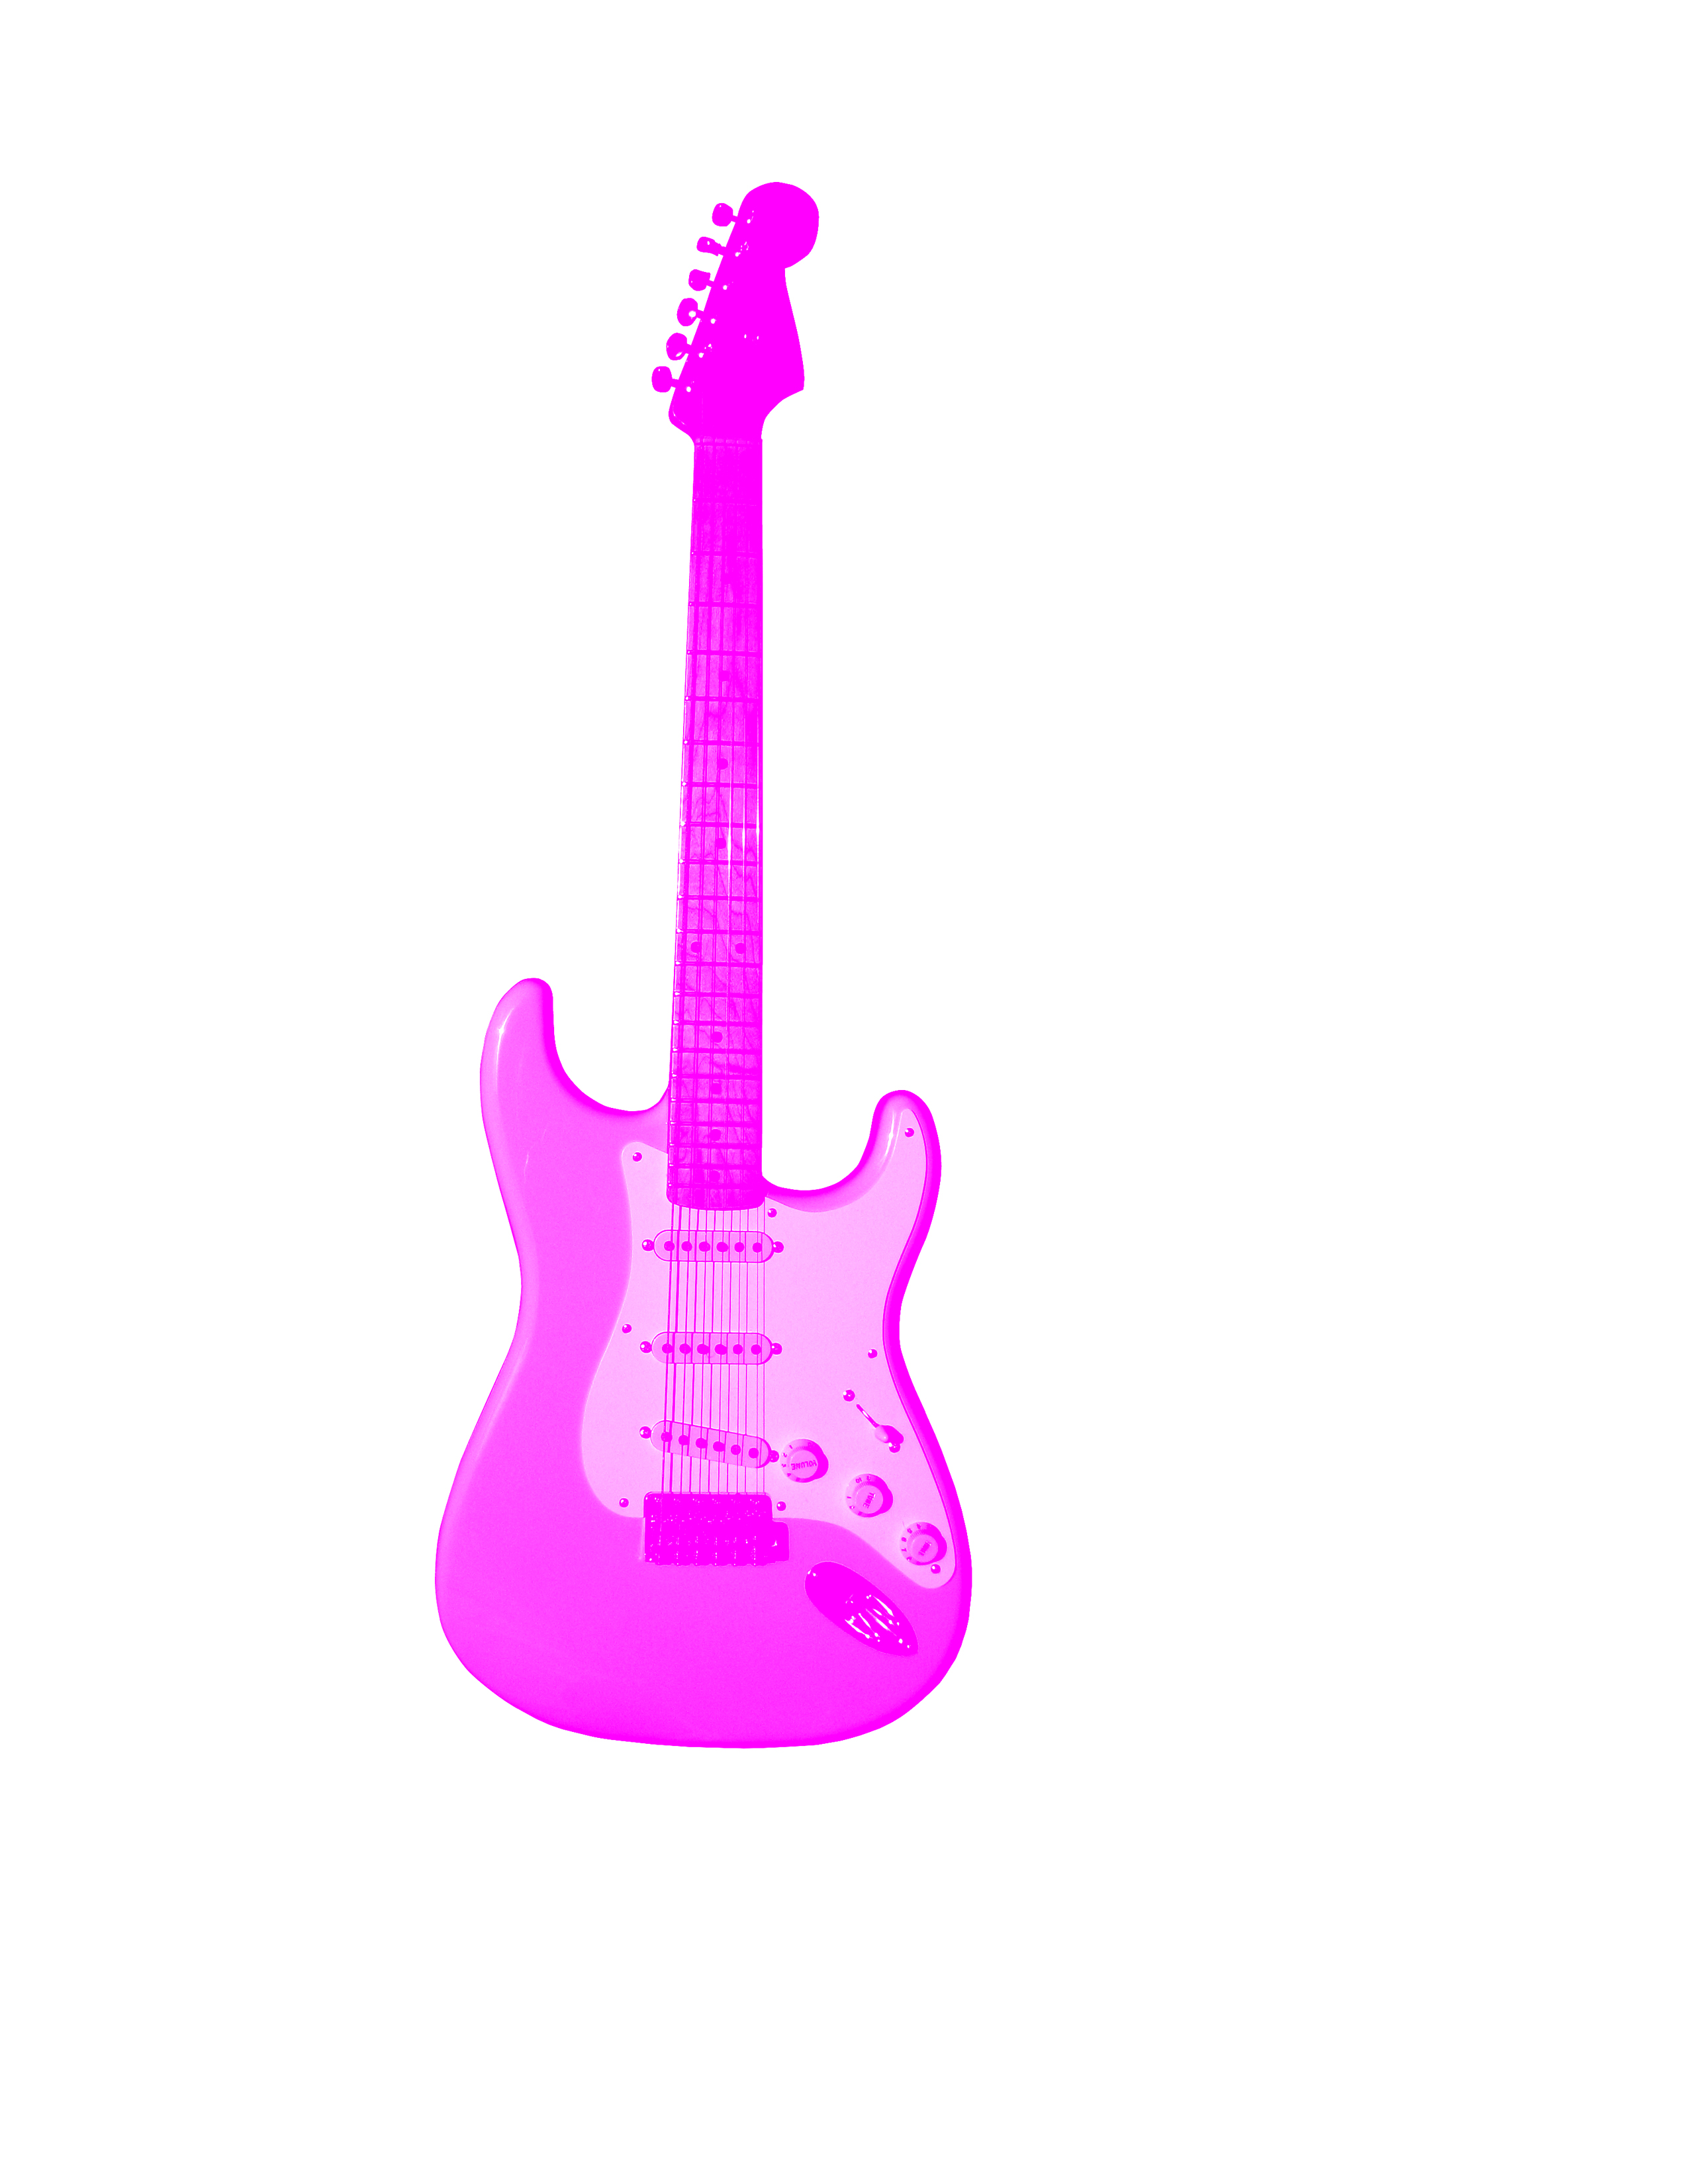 Free Pink Guitar Clipart Image.